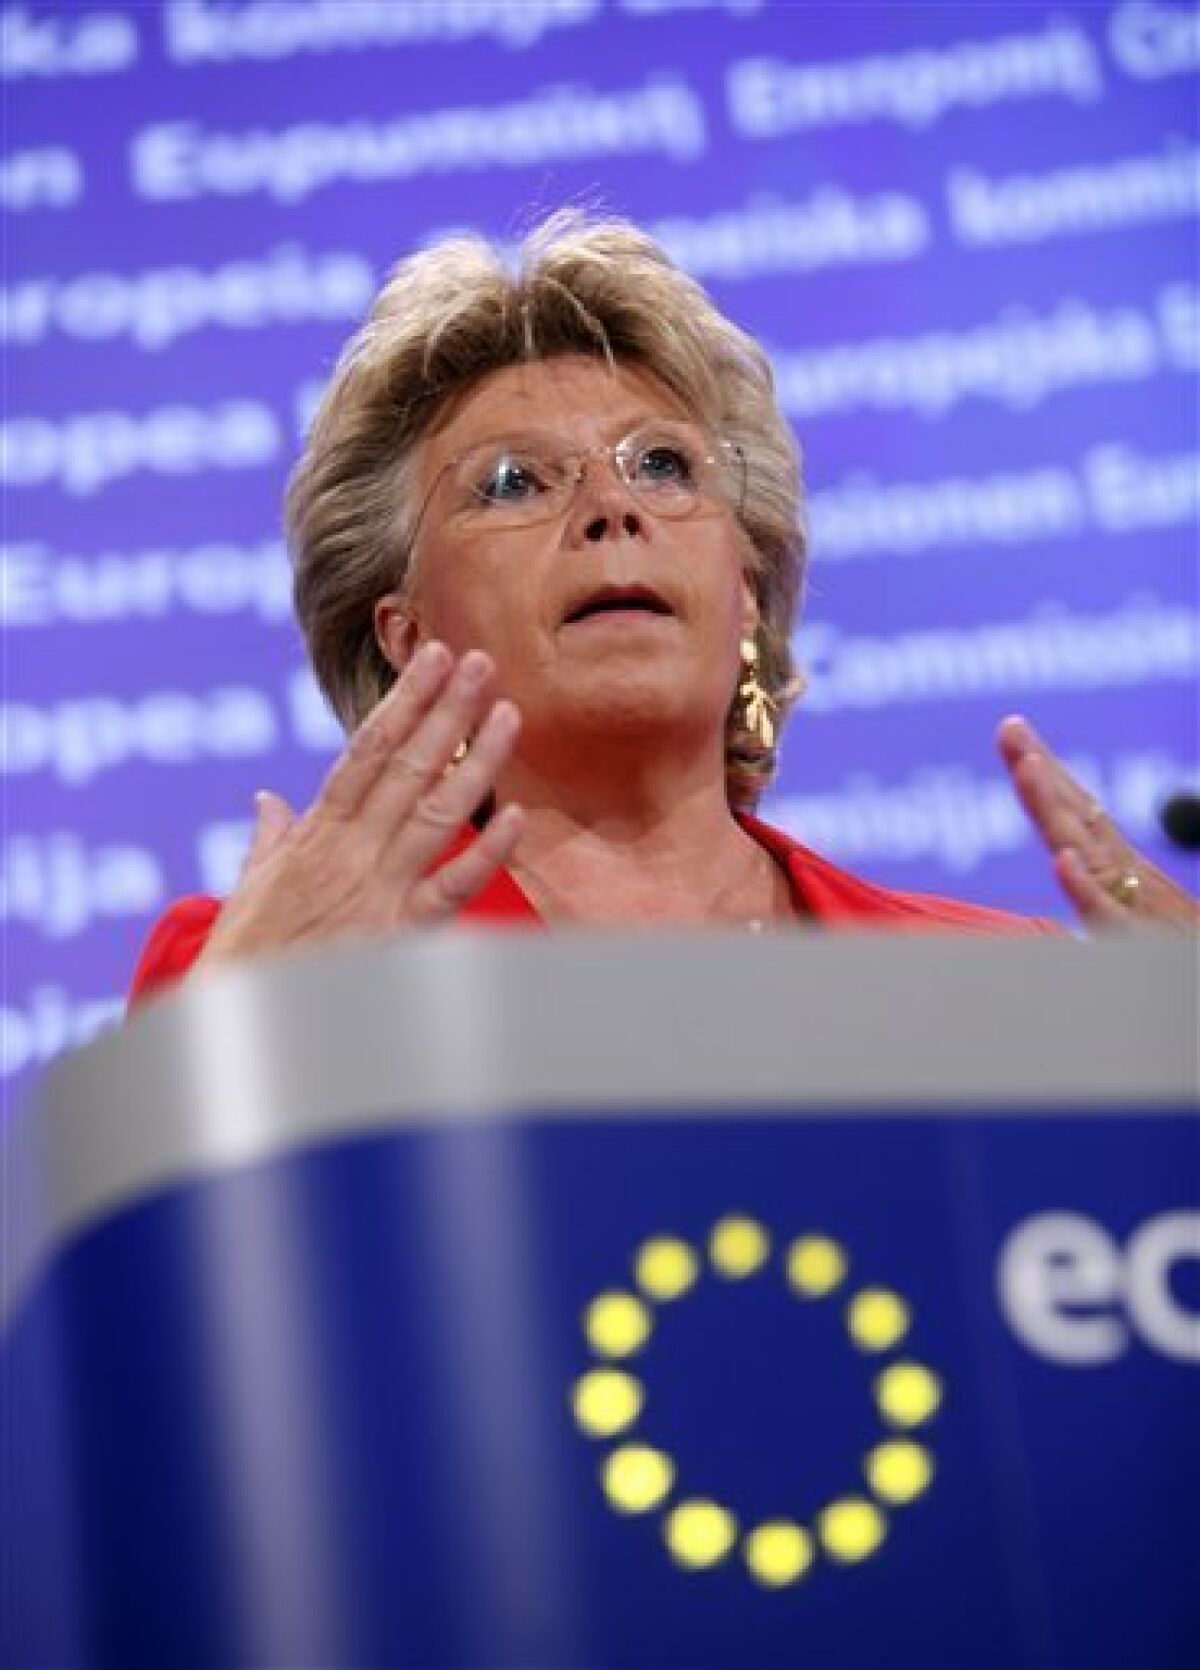 European Commissioner Vice President and Commissioner for Justice Viviane Reding speaks during a media conference at EU headquarters in Brussels, Tuesday, Sept. 14, 2010. Reding threatened France with legal action over the mass expulsions of Roma. France's deportations of Gypsies are "a disgrace" and probably break EU law, the European Union's executive body has declared, setting up a showdown with the government of French President Nicolas Sarkozy. (AP Photo/Virginia Mayo)